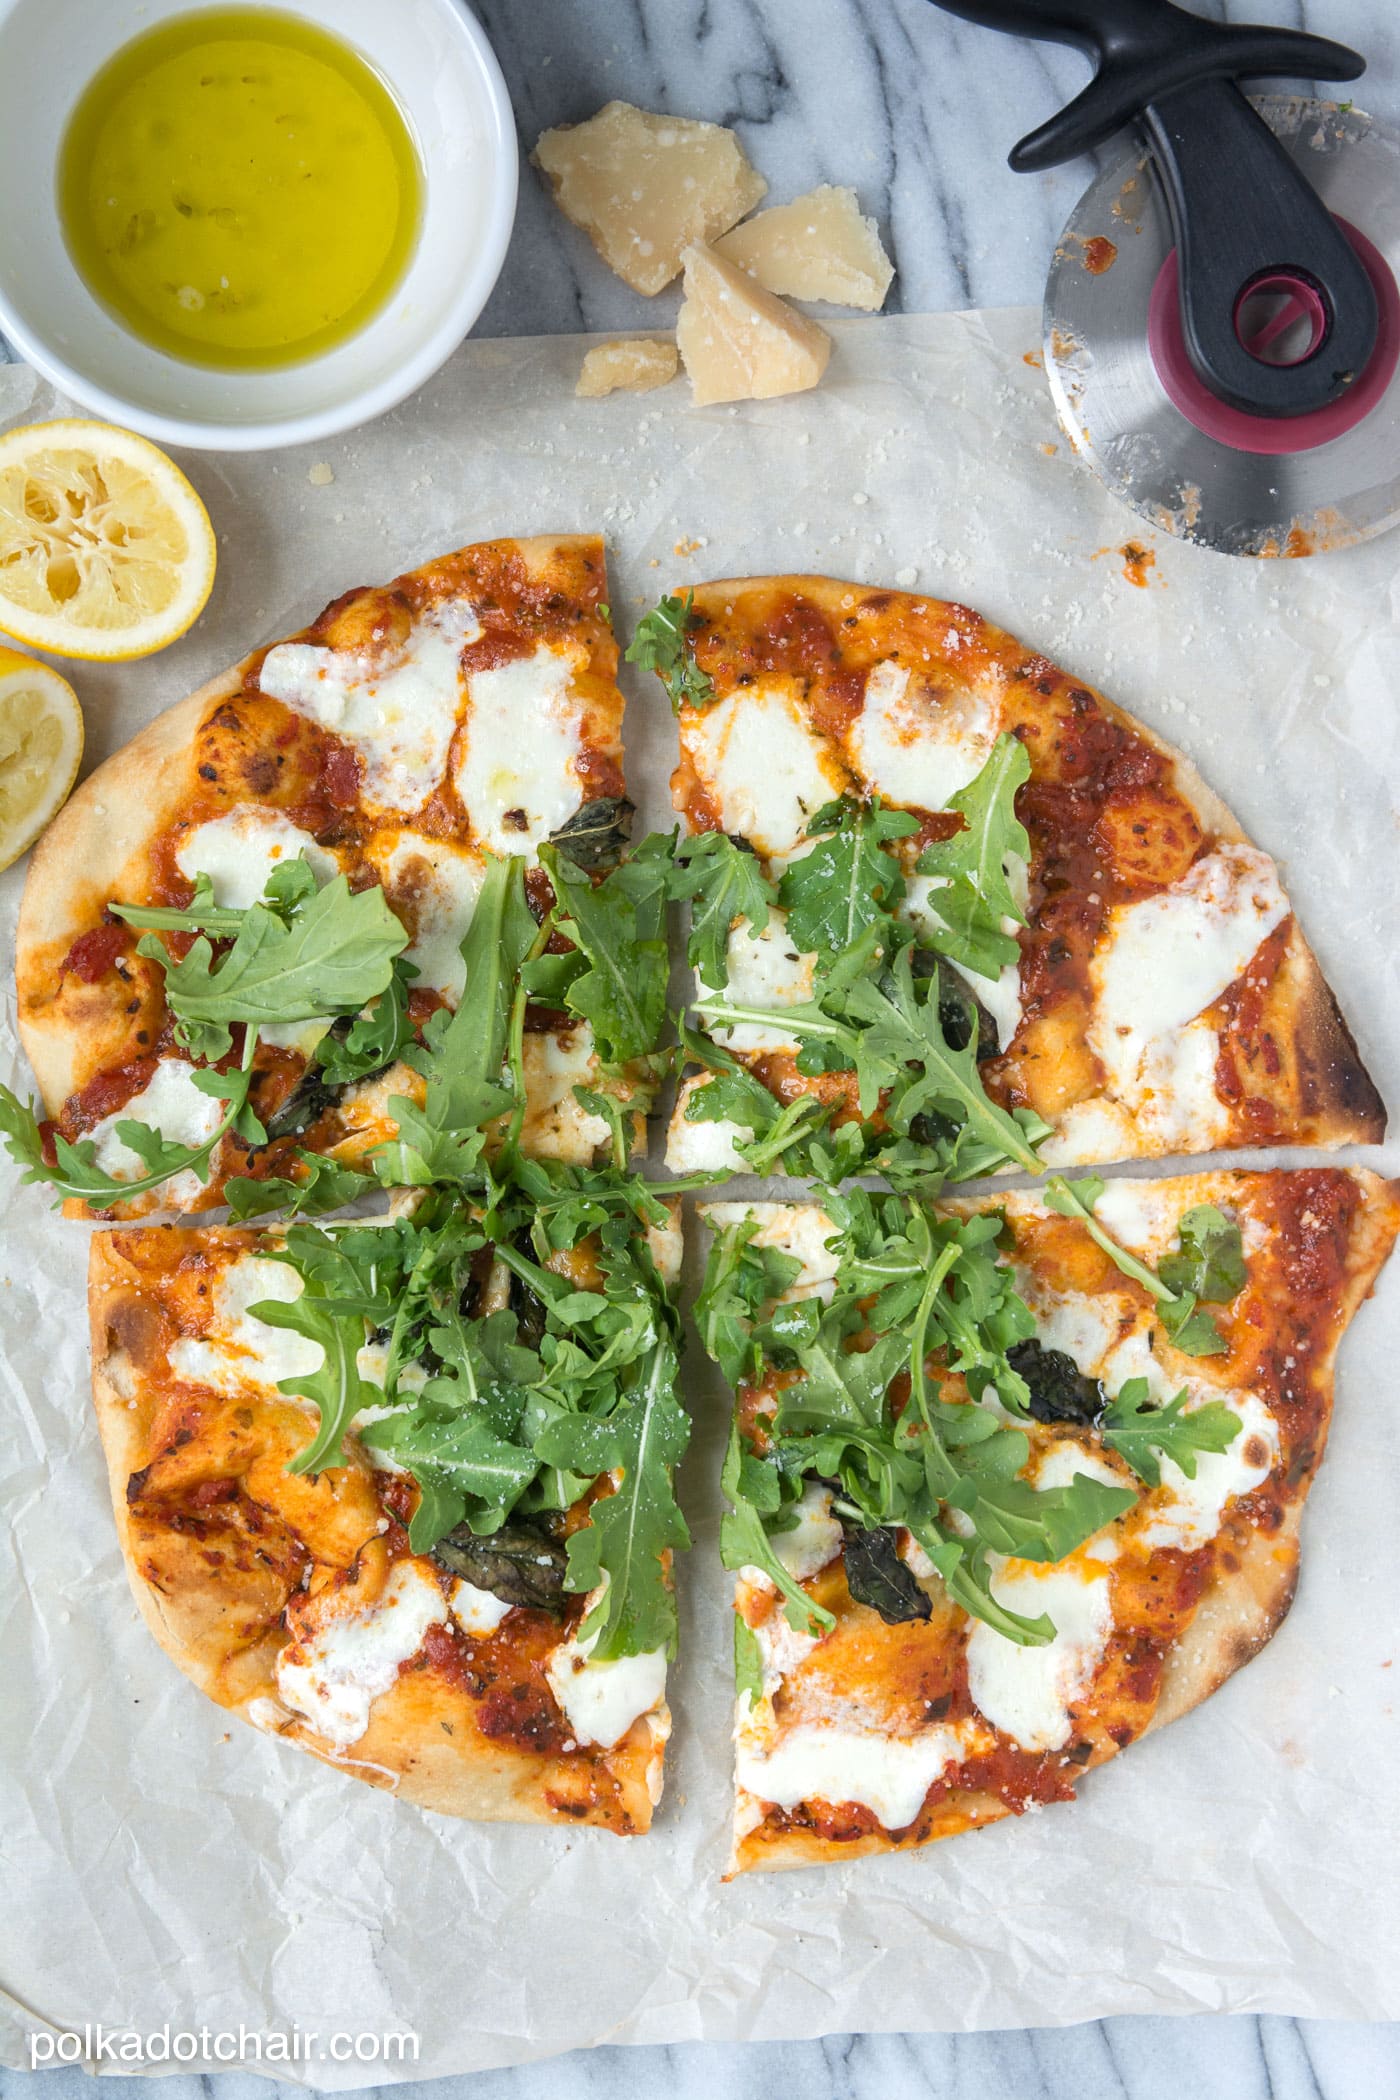 Recipe for home made Margherita Pizza with Arugula and Lemon